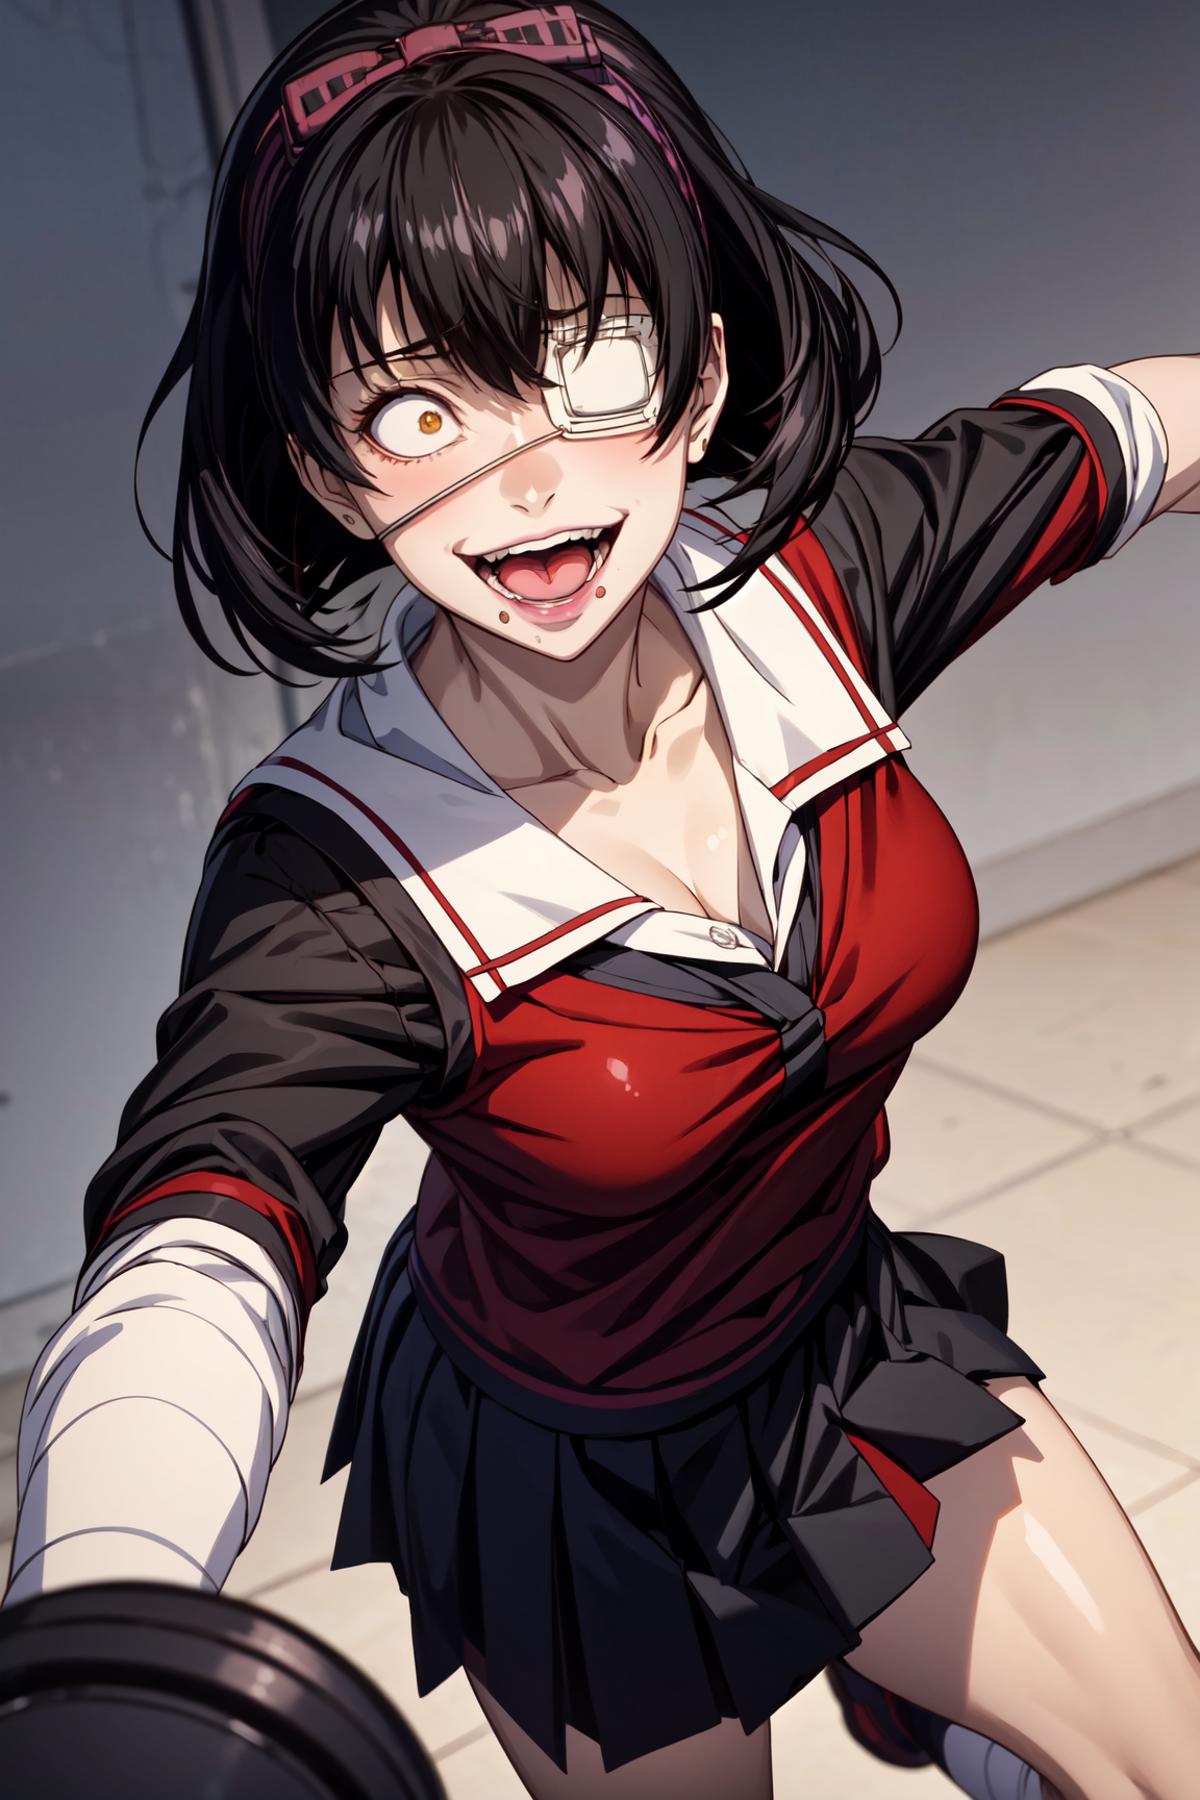 A cartoon drawing of a young girl wearing a red and white uniform, glasses, and possibly a tie. She is smiling with her mouth open and appears to be posing for a picture.